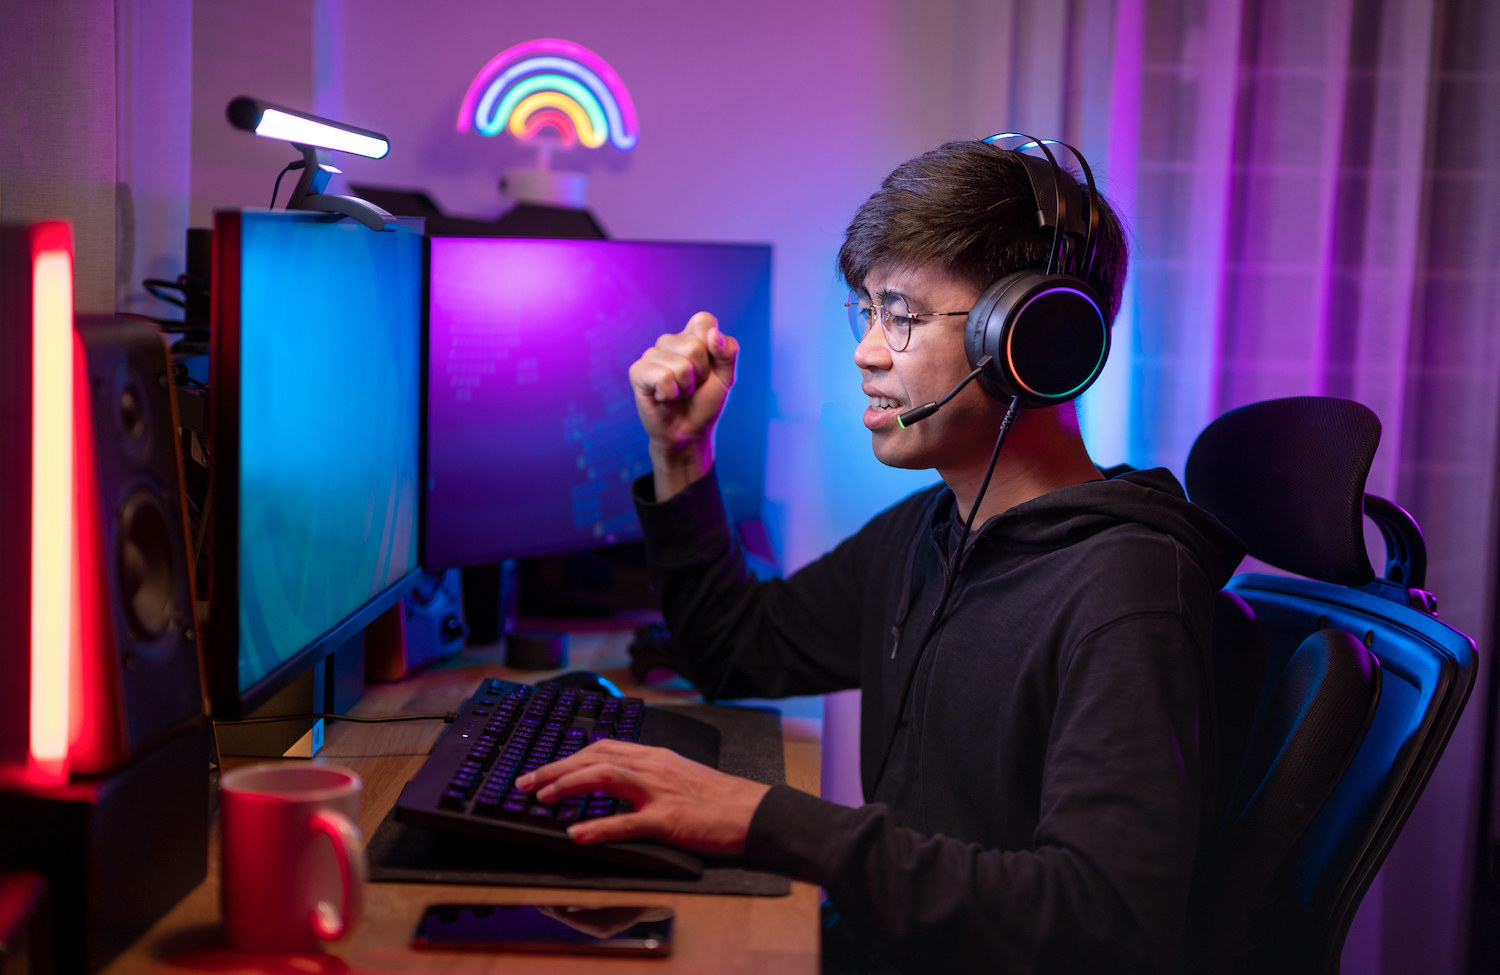 A man with a headset on in front of multiple computer screens